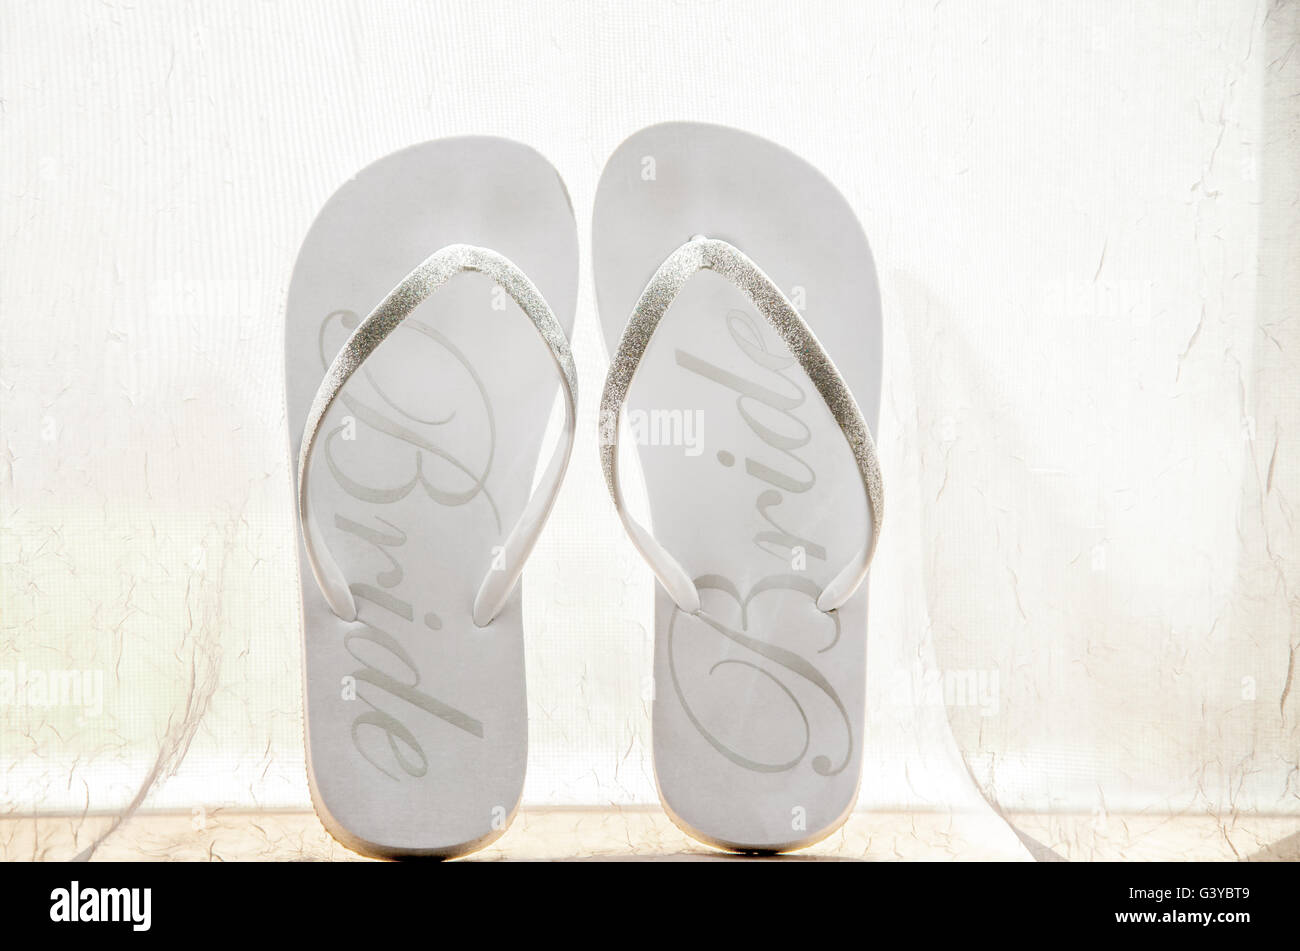 https://c8.alamy.com/comp/G3YBT9/picture-of-a-brides-flip-flops-before-she-puts-them-on-for-the-day-G3YBT9.jpg